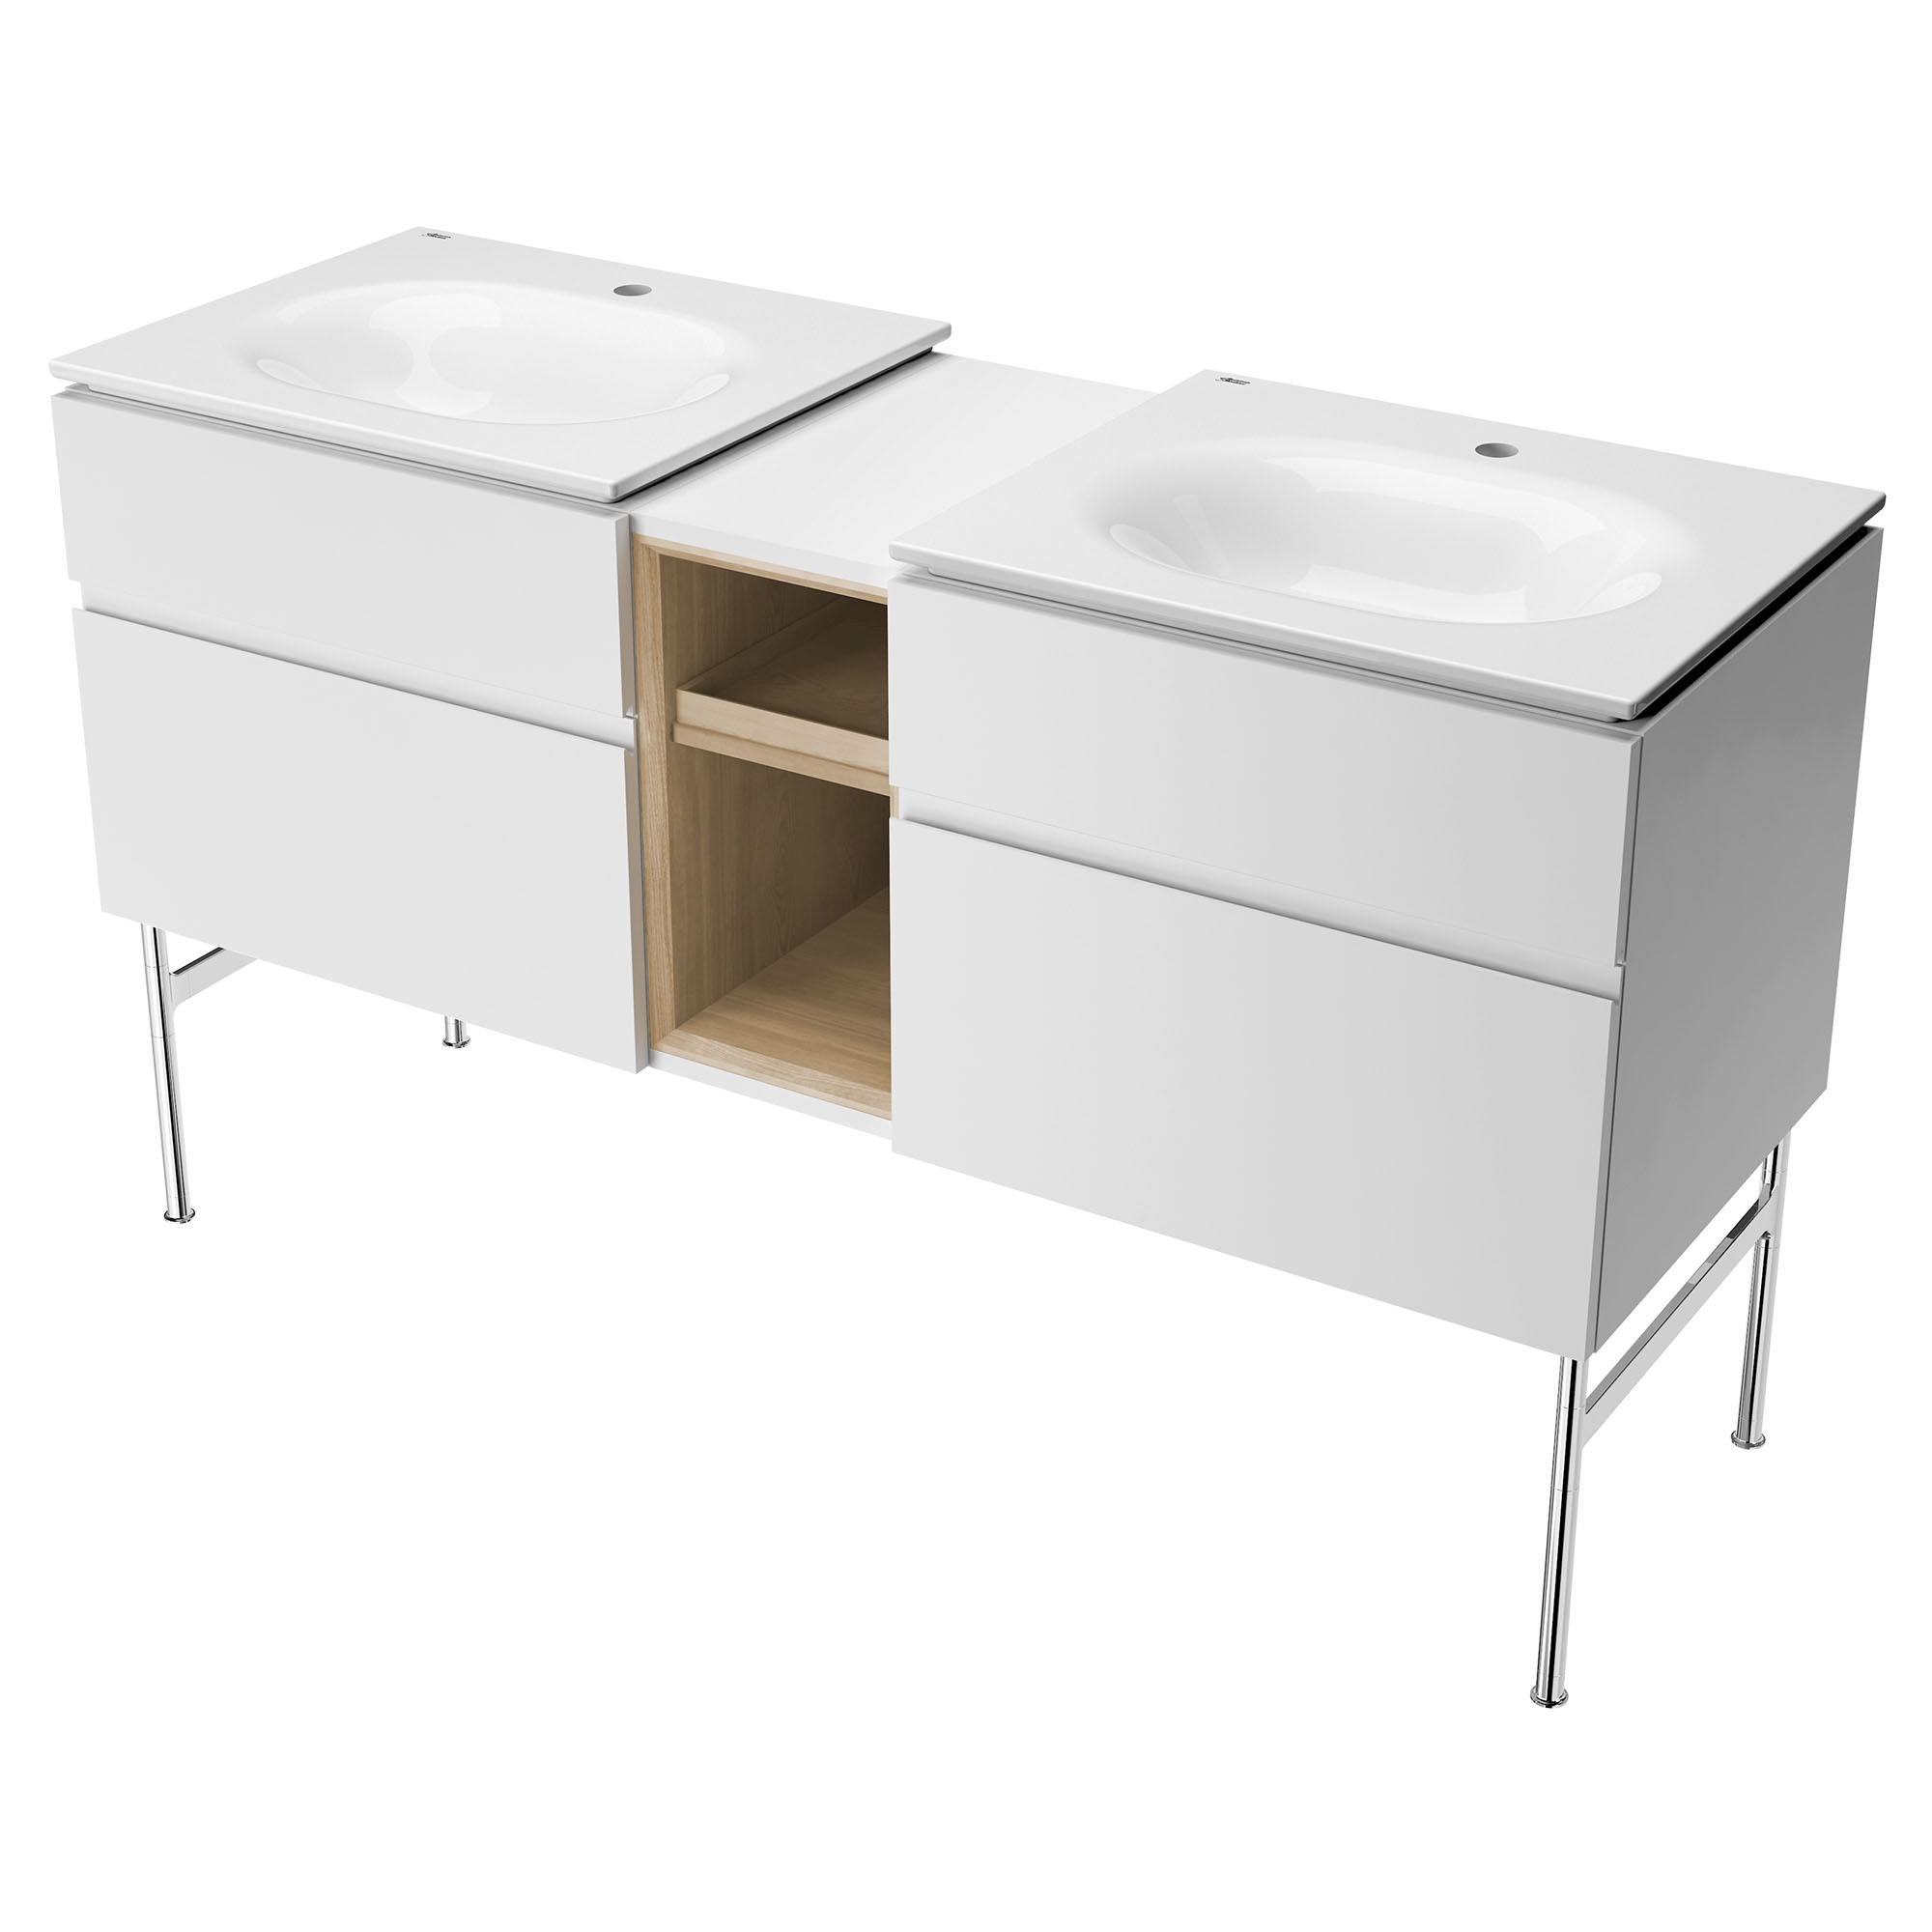 Studio® S 24-Inch Vitreous China Vanity Sink Top Center Hole Only